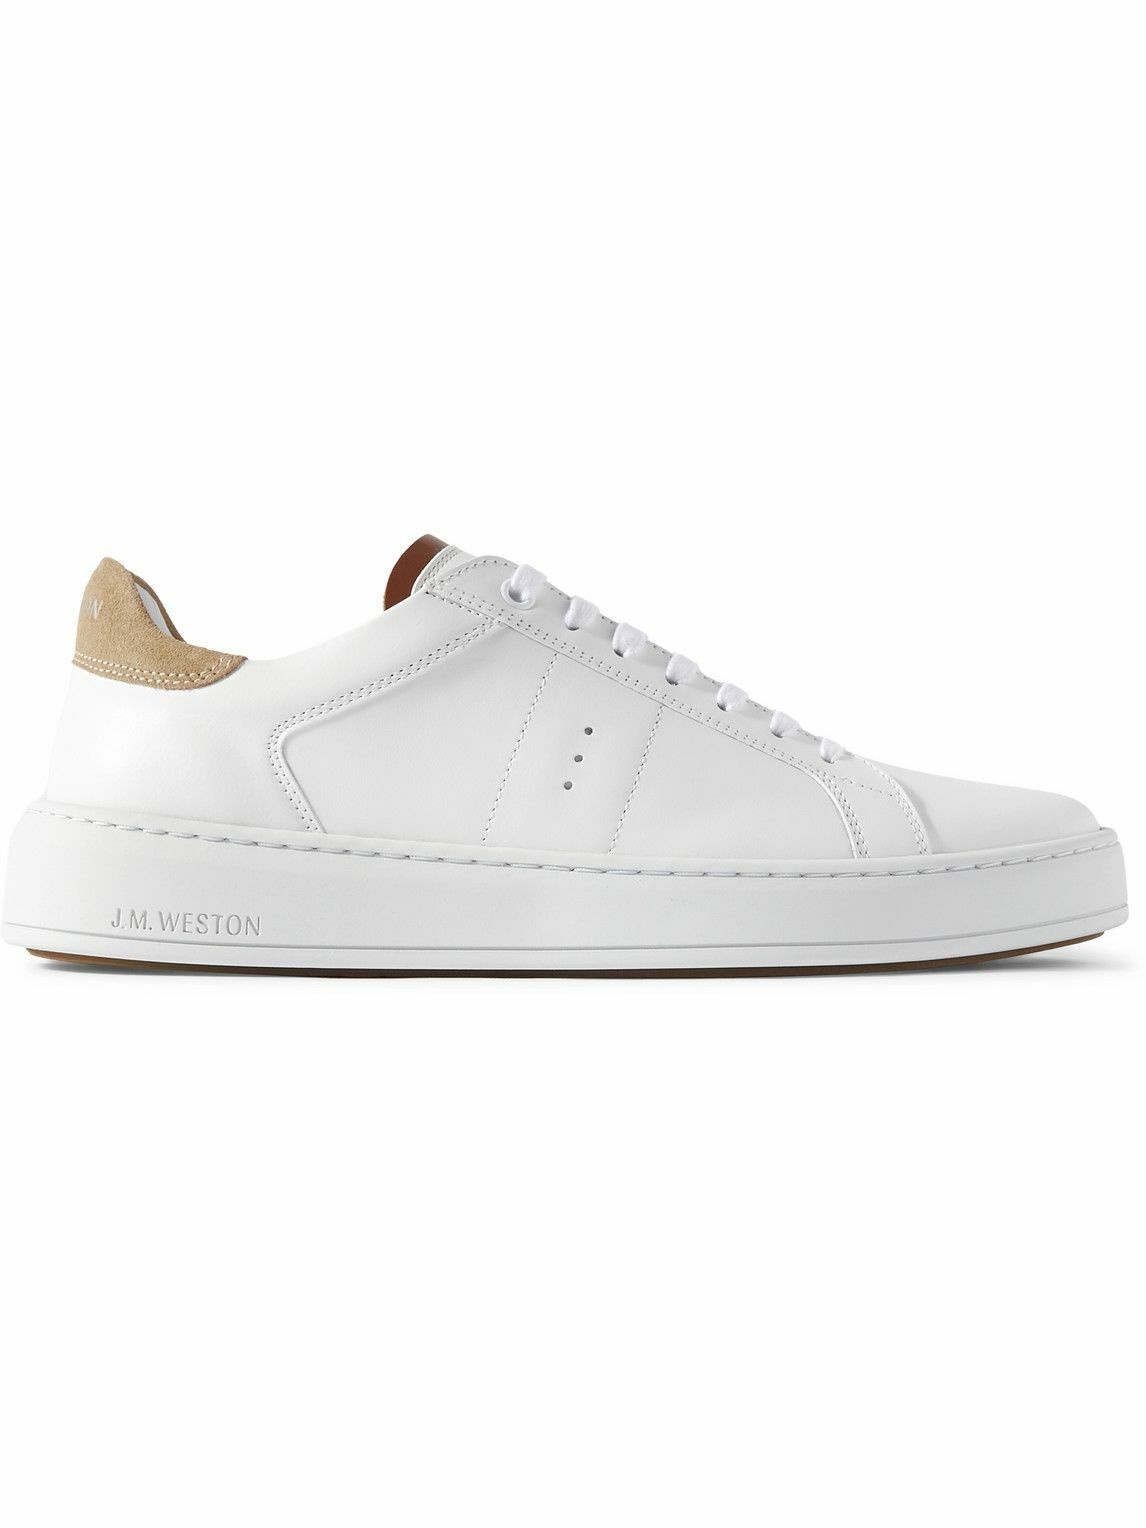 Photo: J.M. Weston - On Time Suede-Trimmed Leather Sneakers - White